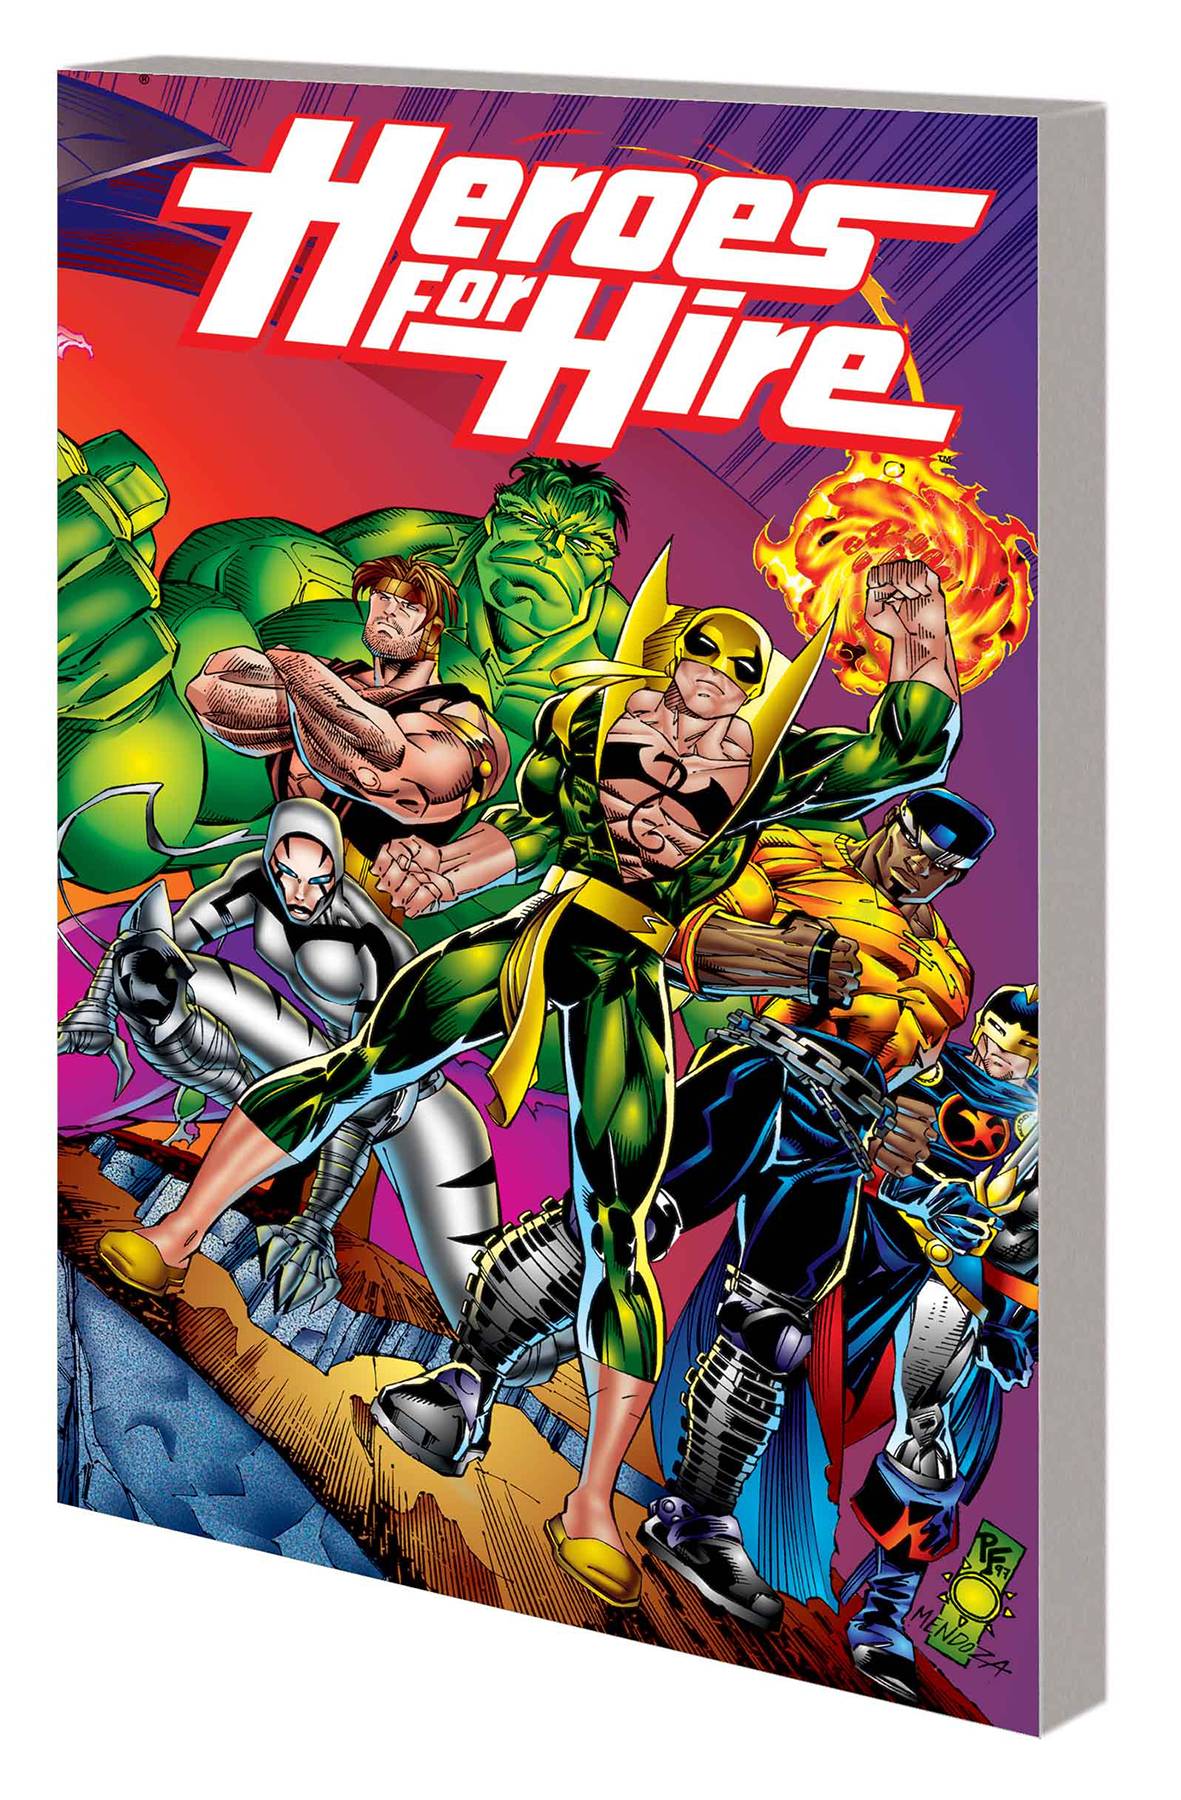 Luke Cage Iron Fist & The Heros For Hire Vol 2 Marvel Trade Paperback New